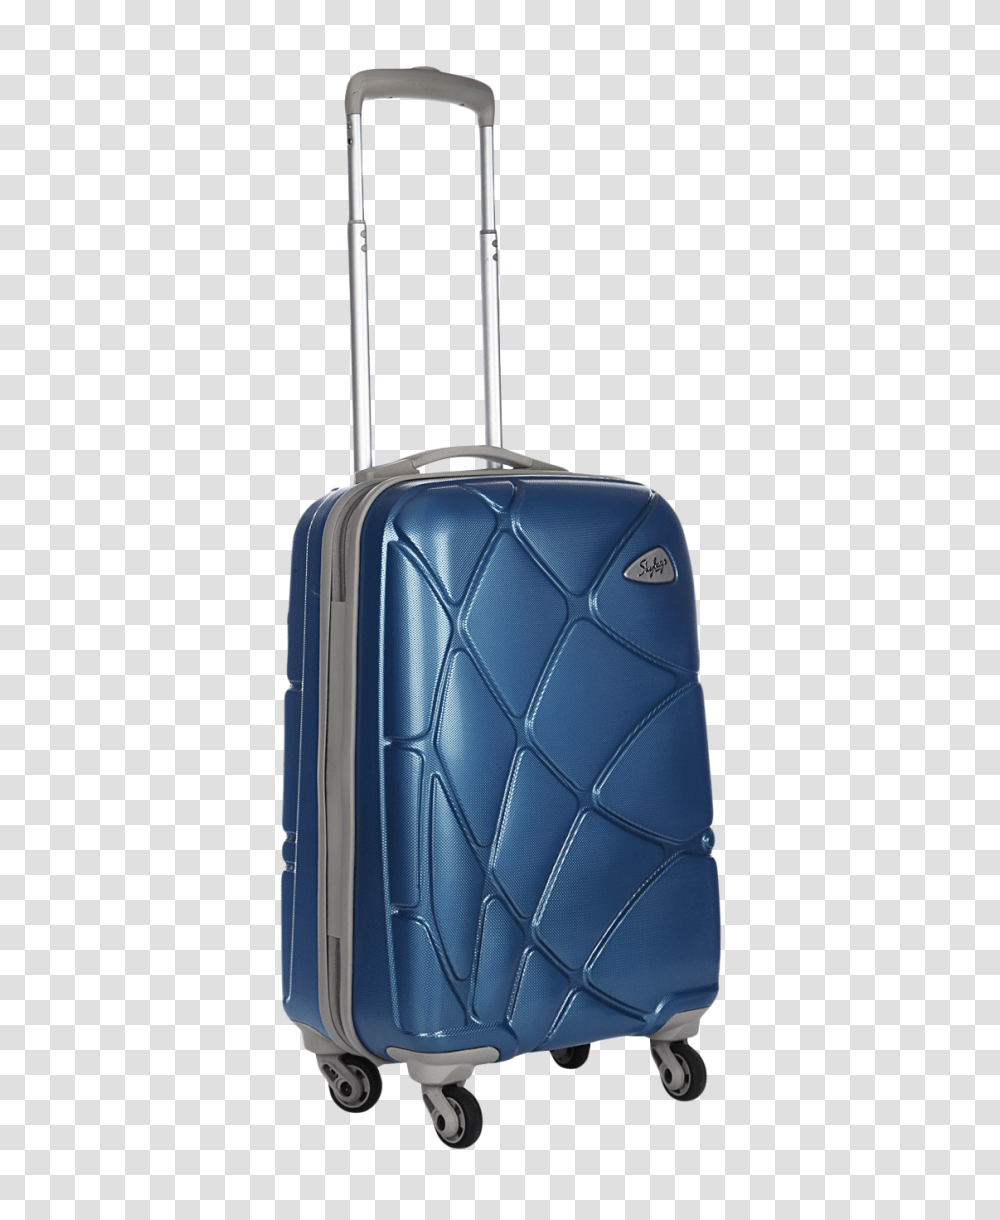 Download Strolley Suitcase Luggage Baggage, Backpack Transparent Png